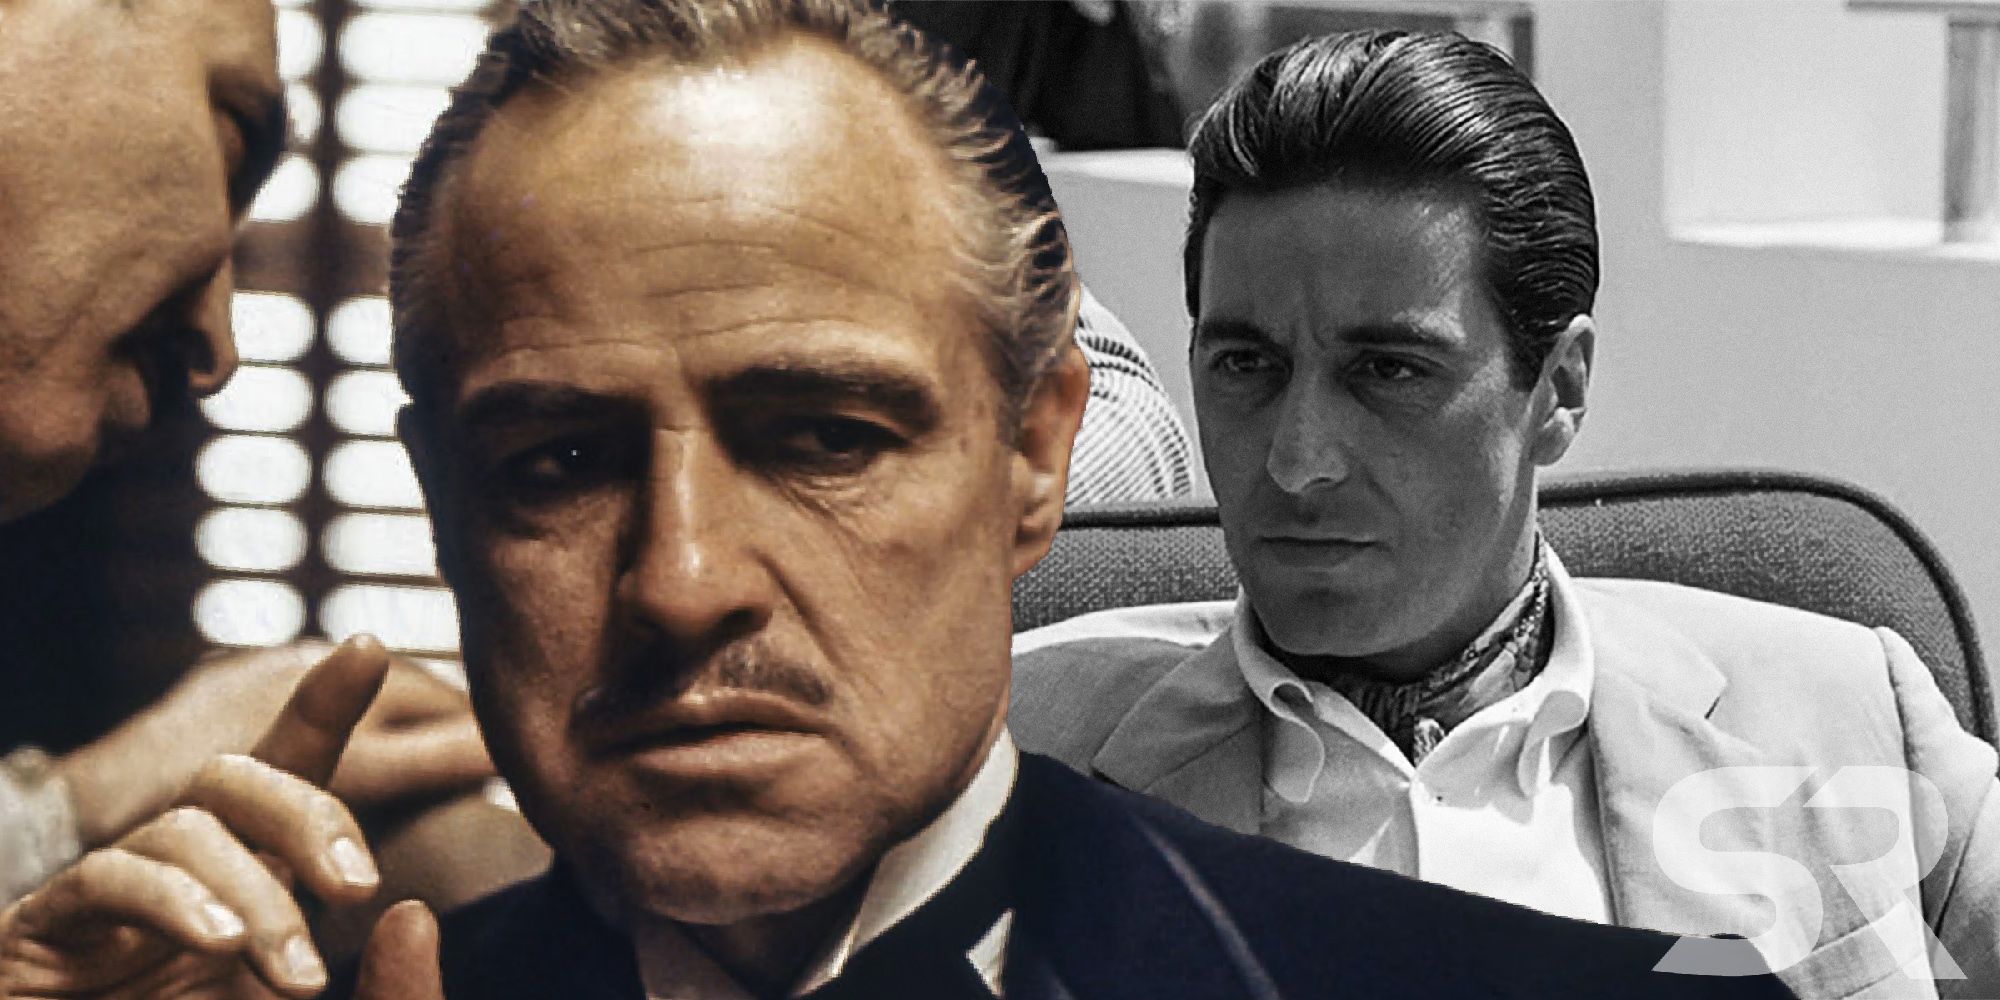 the godfather 3 vs the godfather 1 and 2